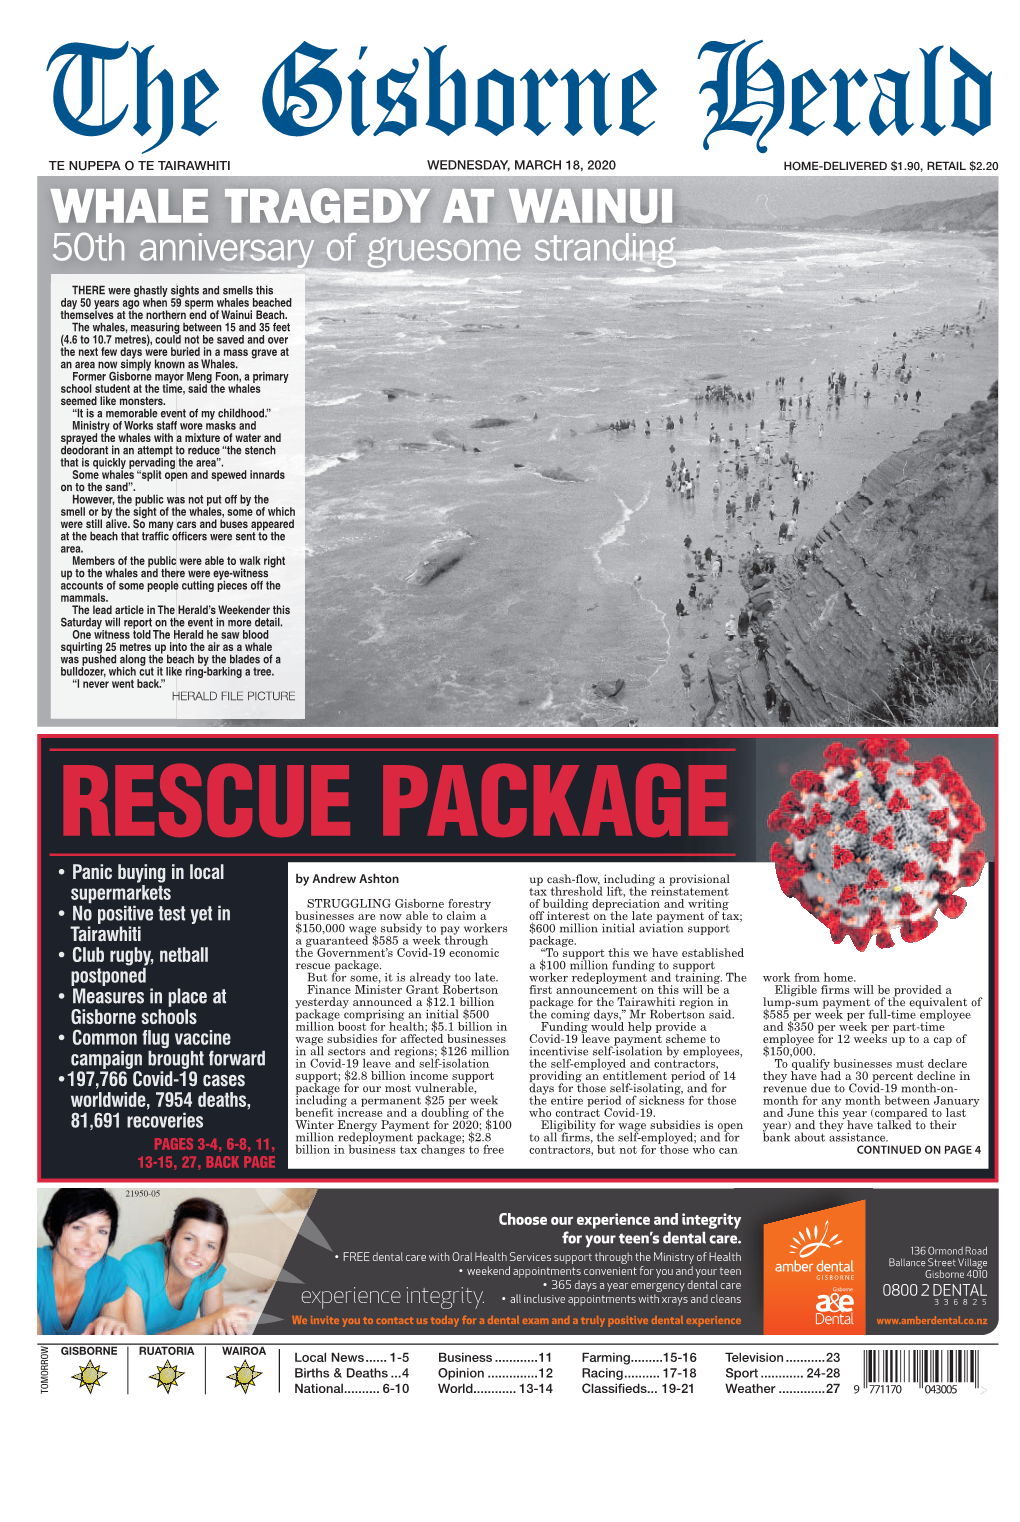 WEDNESDAY, MARCH 18, 2020 HOME-DELIVERED $1.90, RETAIL $2.20 WHALE TRAGEDY at WAINUI 50Th Anniversary of Gruesome Stranding